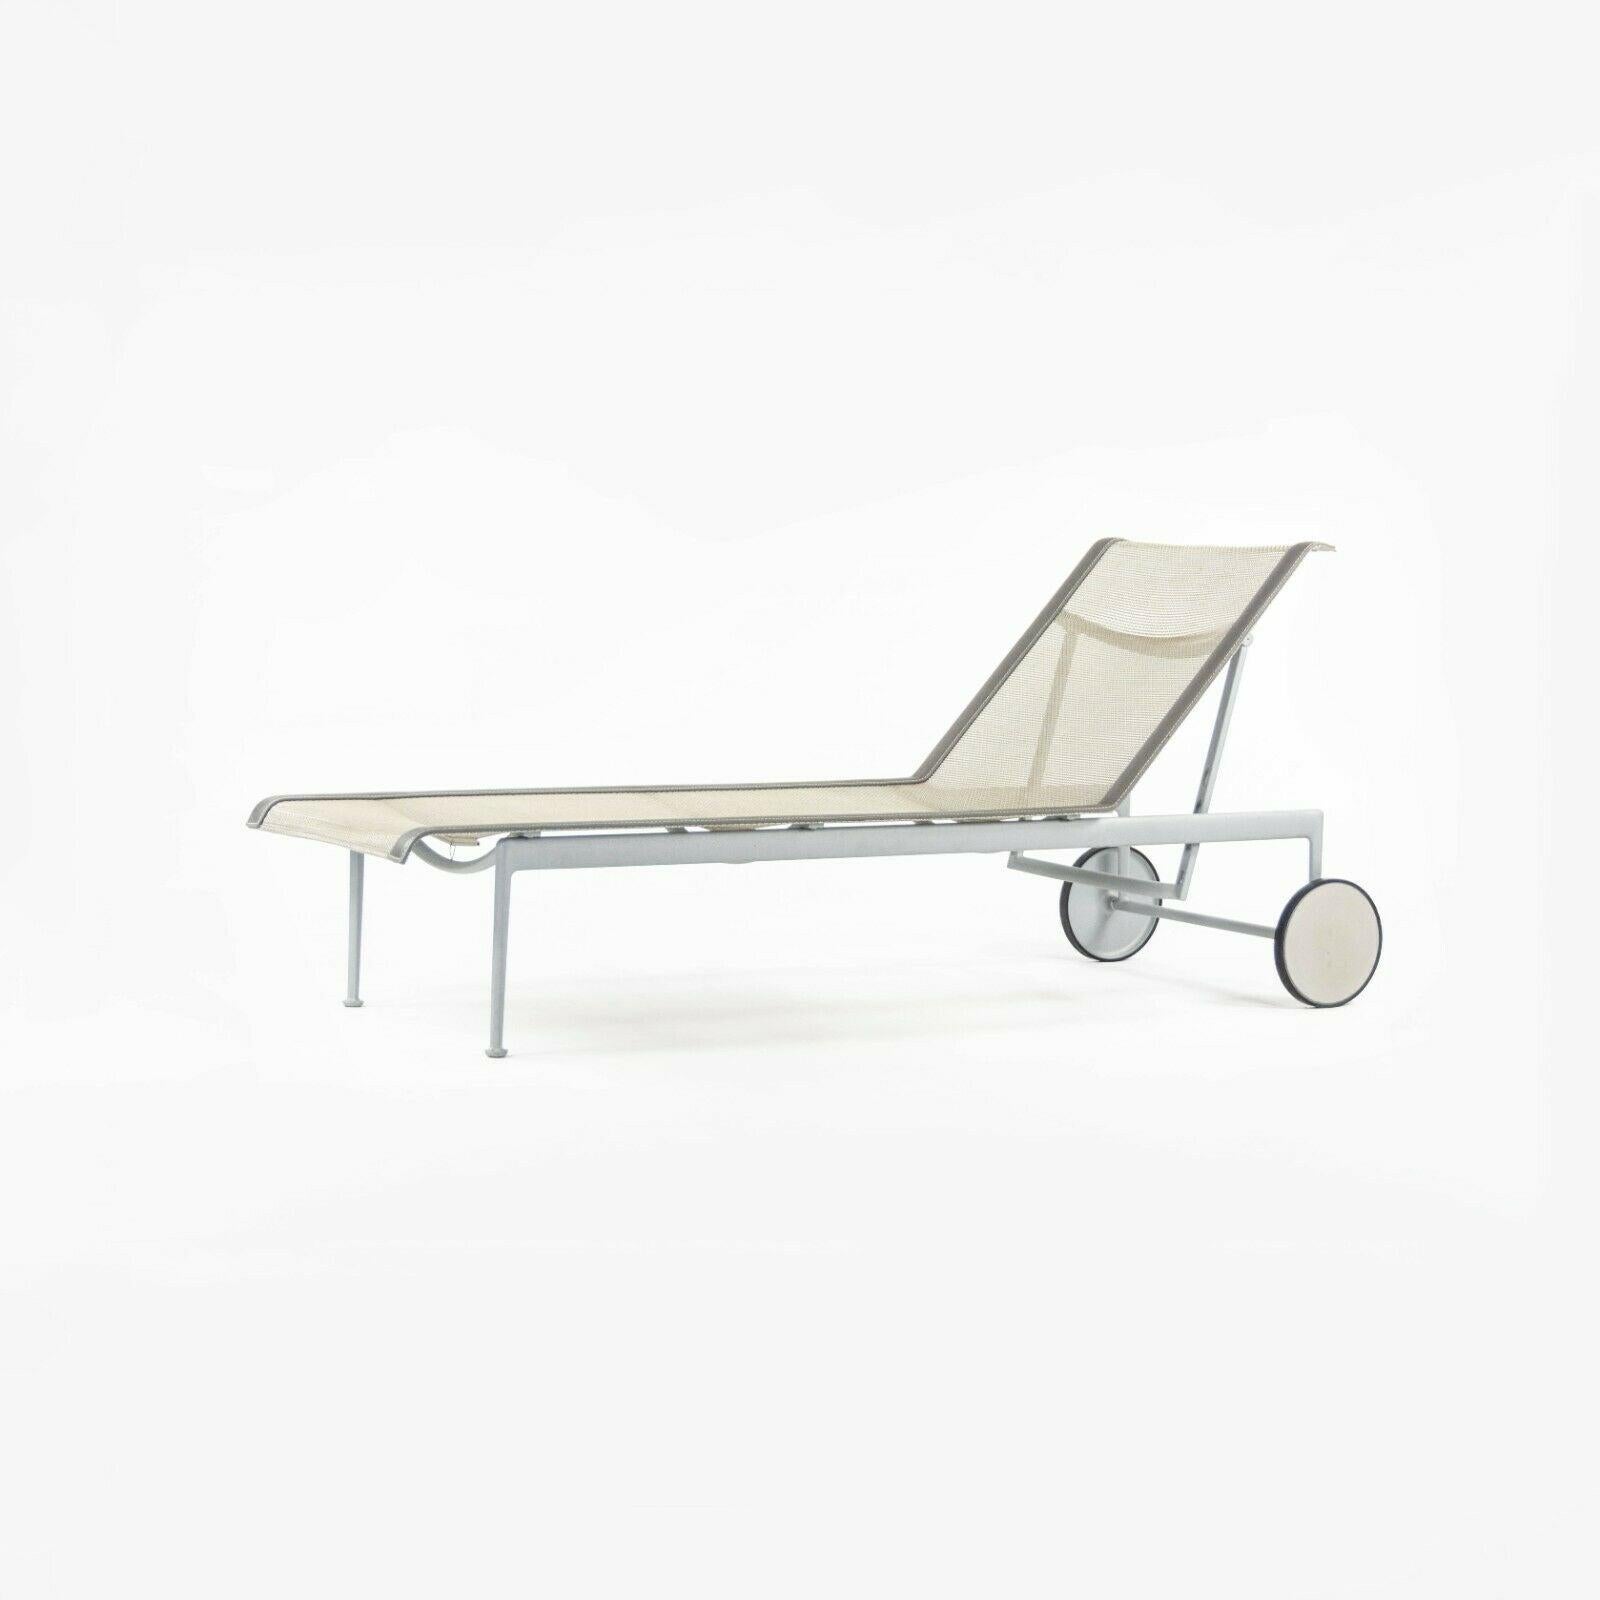 2012 Richard Schultz 1966 Series Adjustable Chaise Lounge Chair in Silver In Good Condition For Sale In Philadelphia, PA